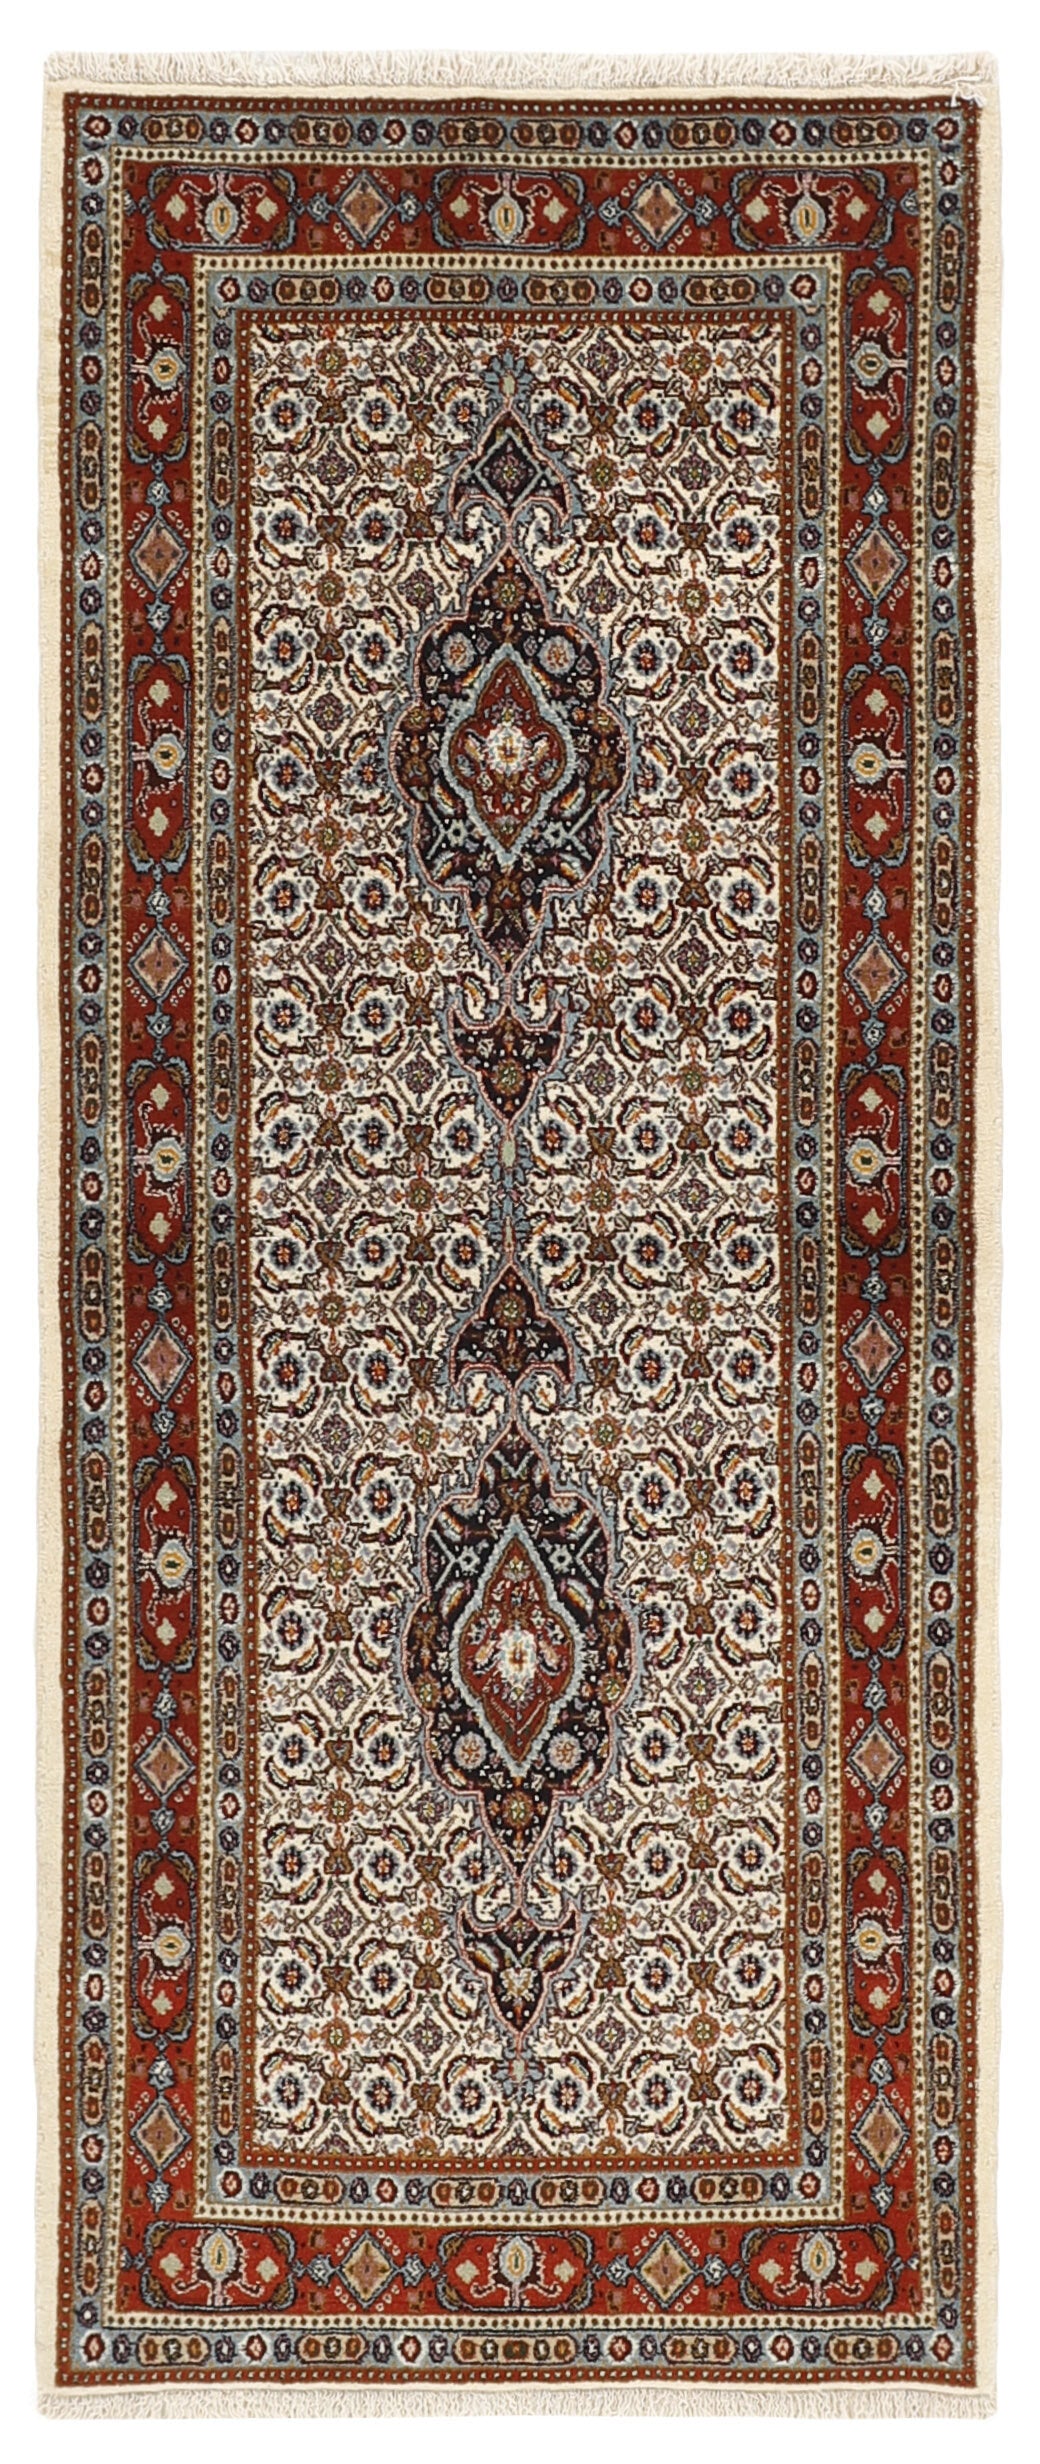 authentic persian runner with traditional floral pattern in red, pink, yellow, blue, green, beige, cream, brown and black